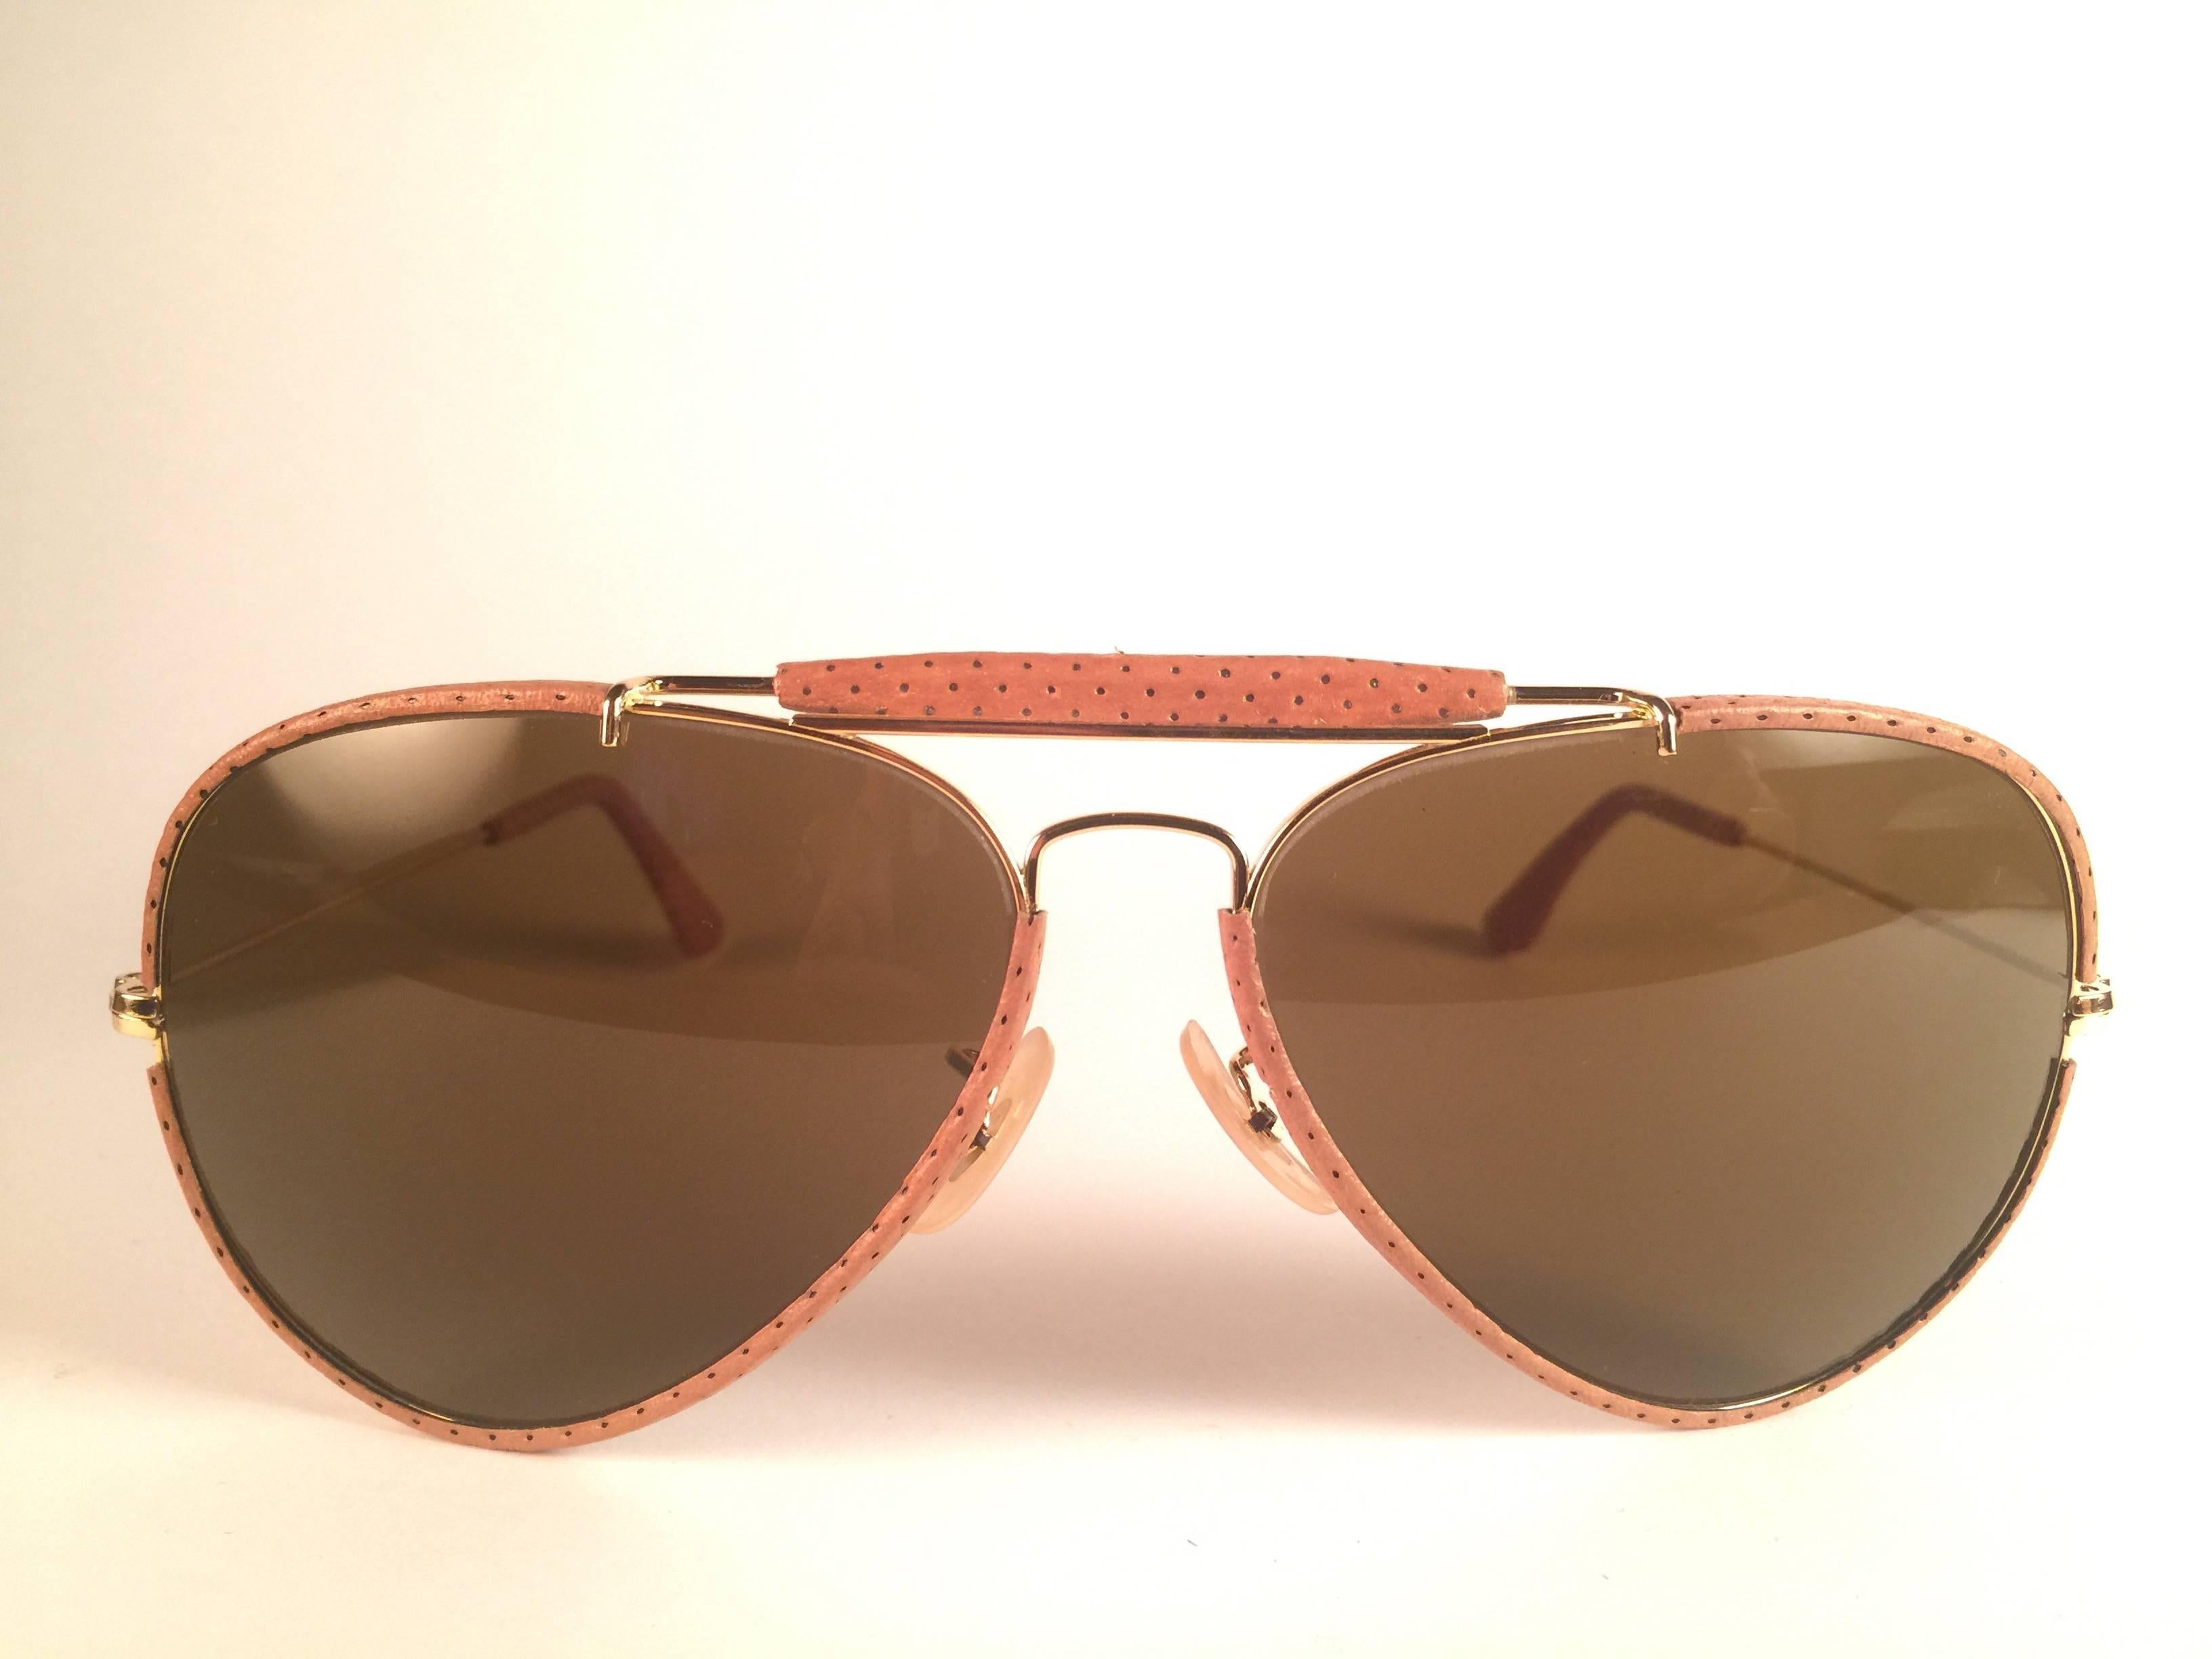 New Vintage Ray Ban Leathers Outdoorsman 62mm in perforated beige leather with gold metal combination frame sporting solid brown lenses.

Comes with its original Ray Ban B&L case with minor sign of wear due to storage. 
Rare and hard to find in this